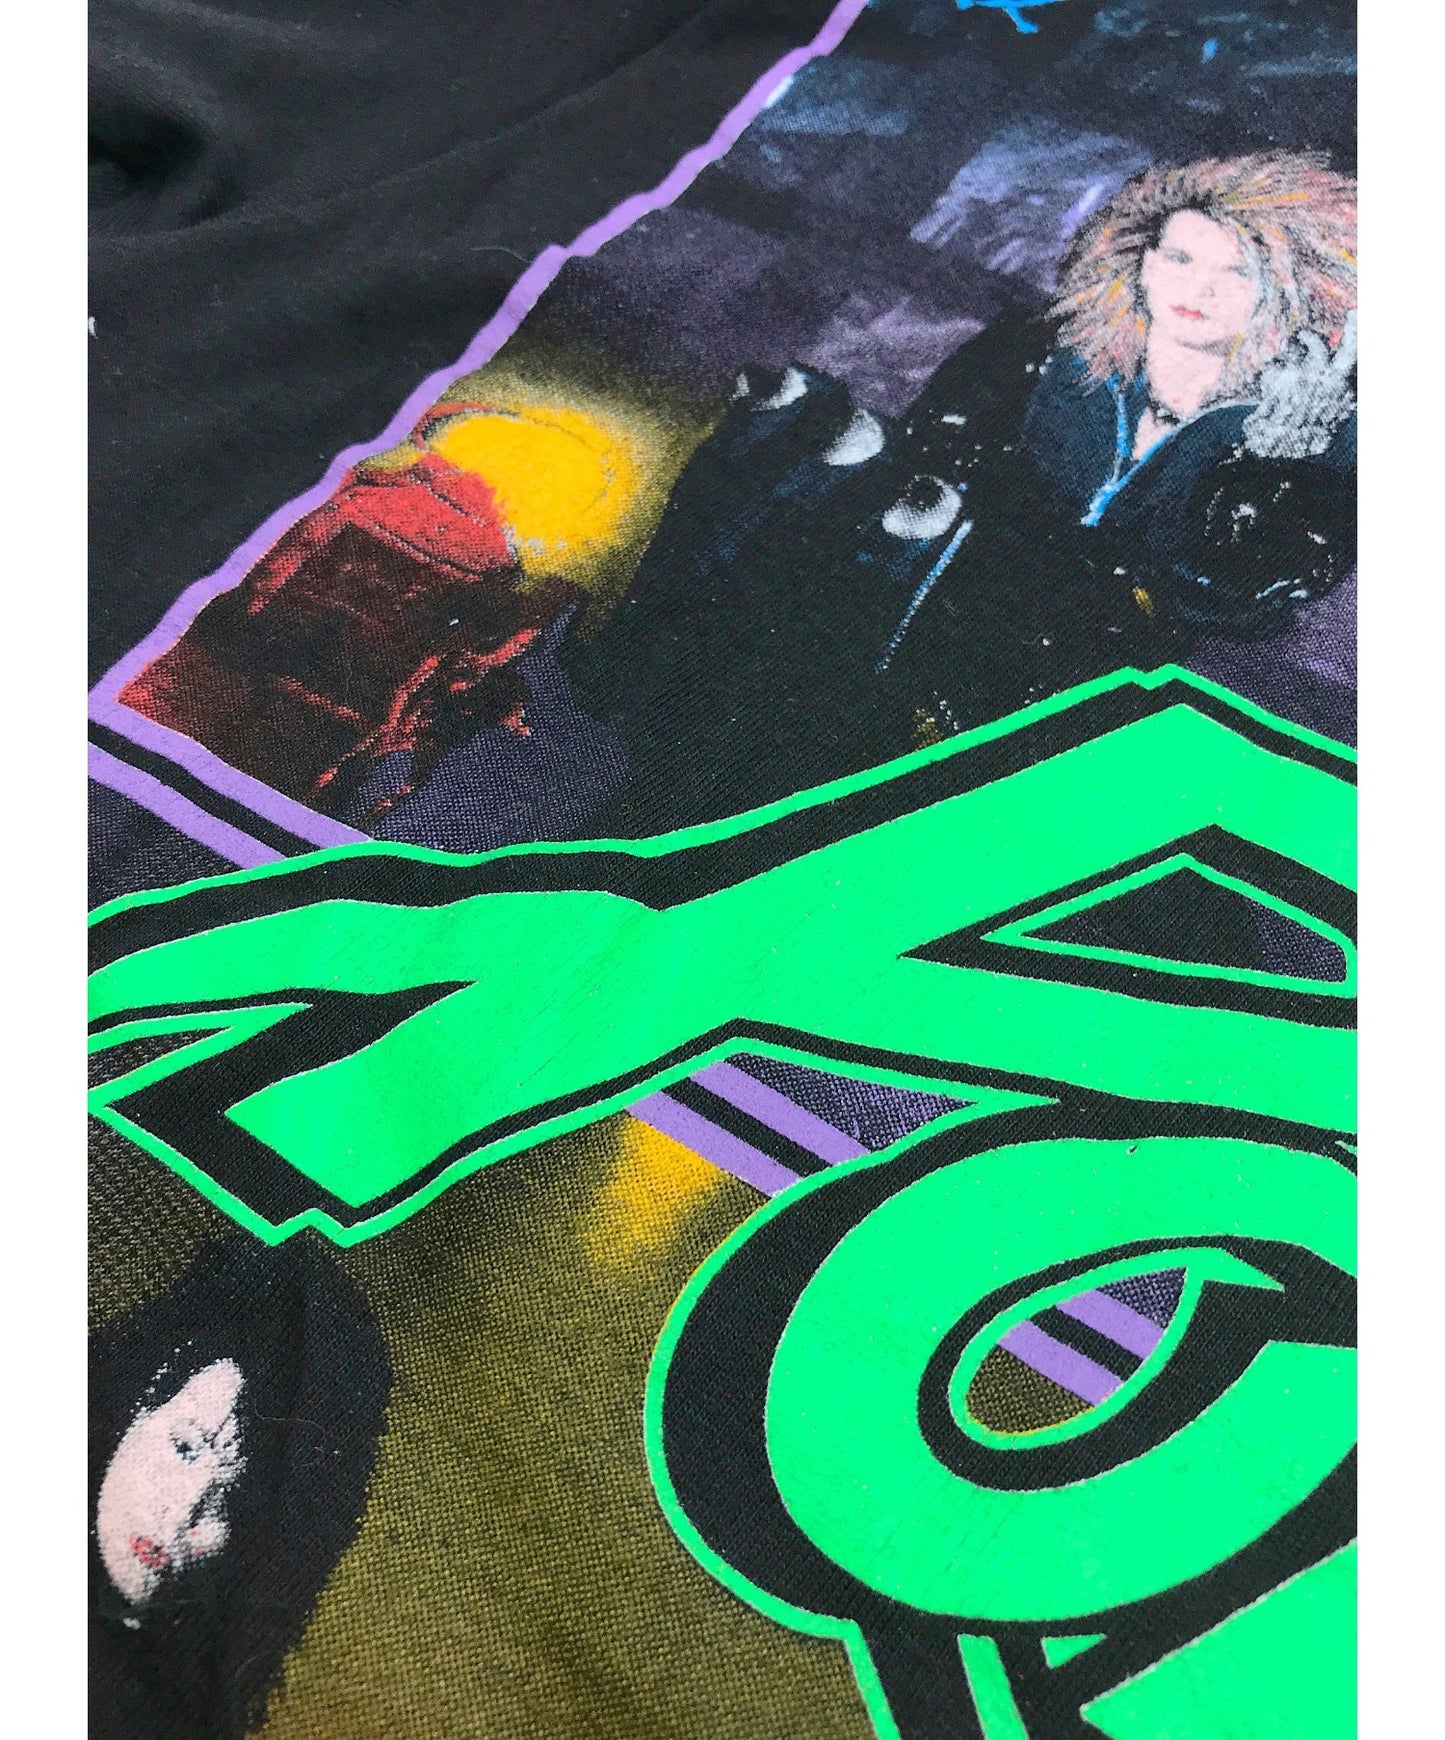 [Pre-owned] POISON 80’s band T-shirt 86 years Copywrite